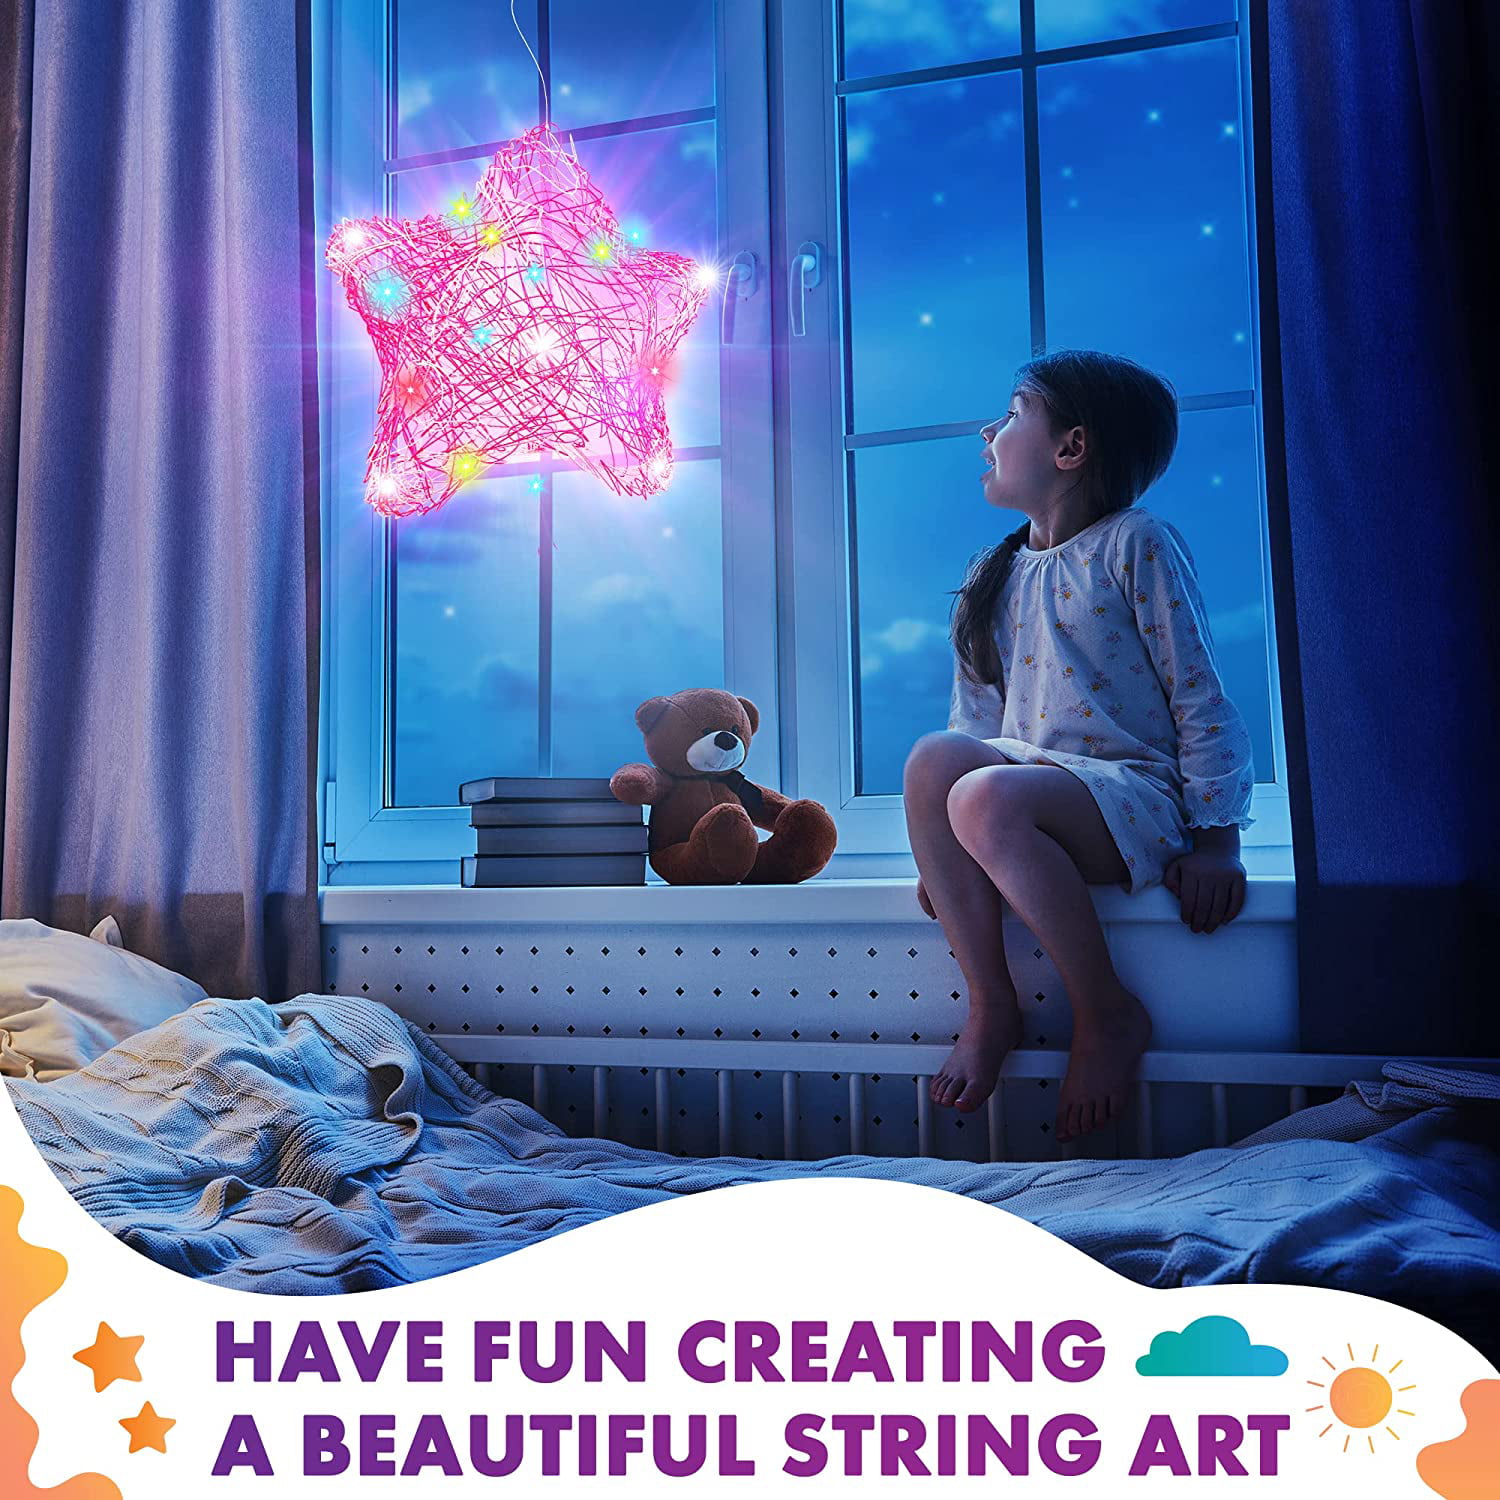  CREATIVEHOME Make a Glows Star Lantern with 30 Multi-Colored  LED Bulbs - Kids Gifts - 3D String Art Kit for Kids - DIY Arts & Craft Kits  - Crafts for Girls